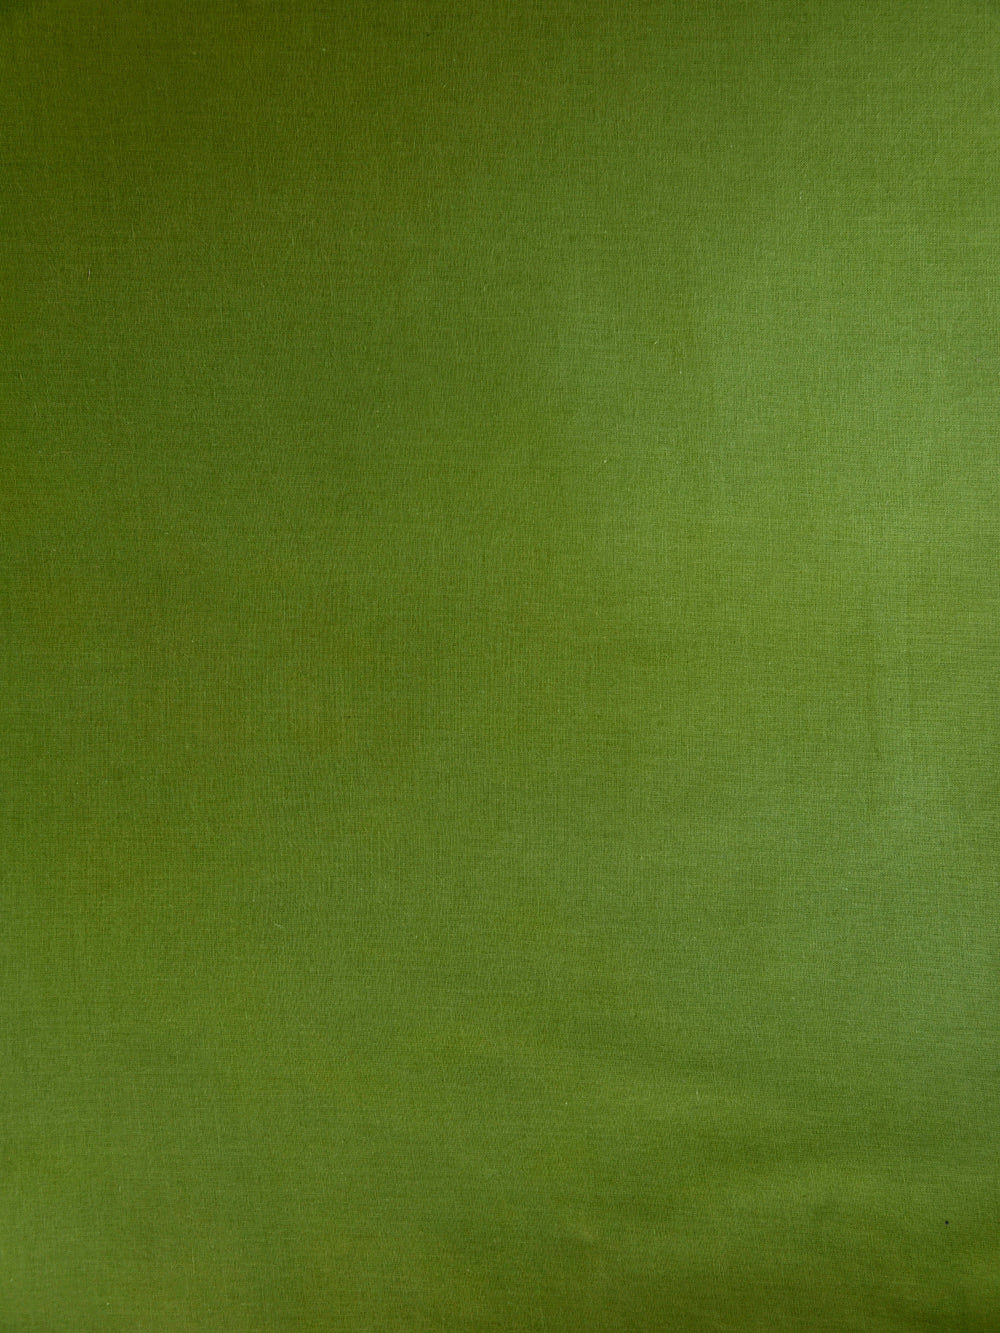 C-5 Light Green Shade Solid Dyed Cotton Cambric Fabric